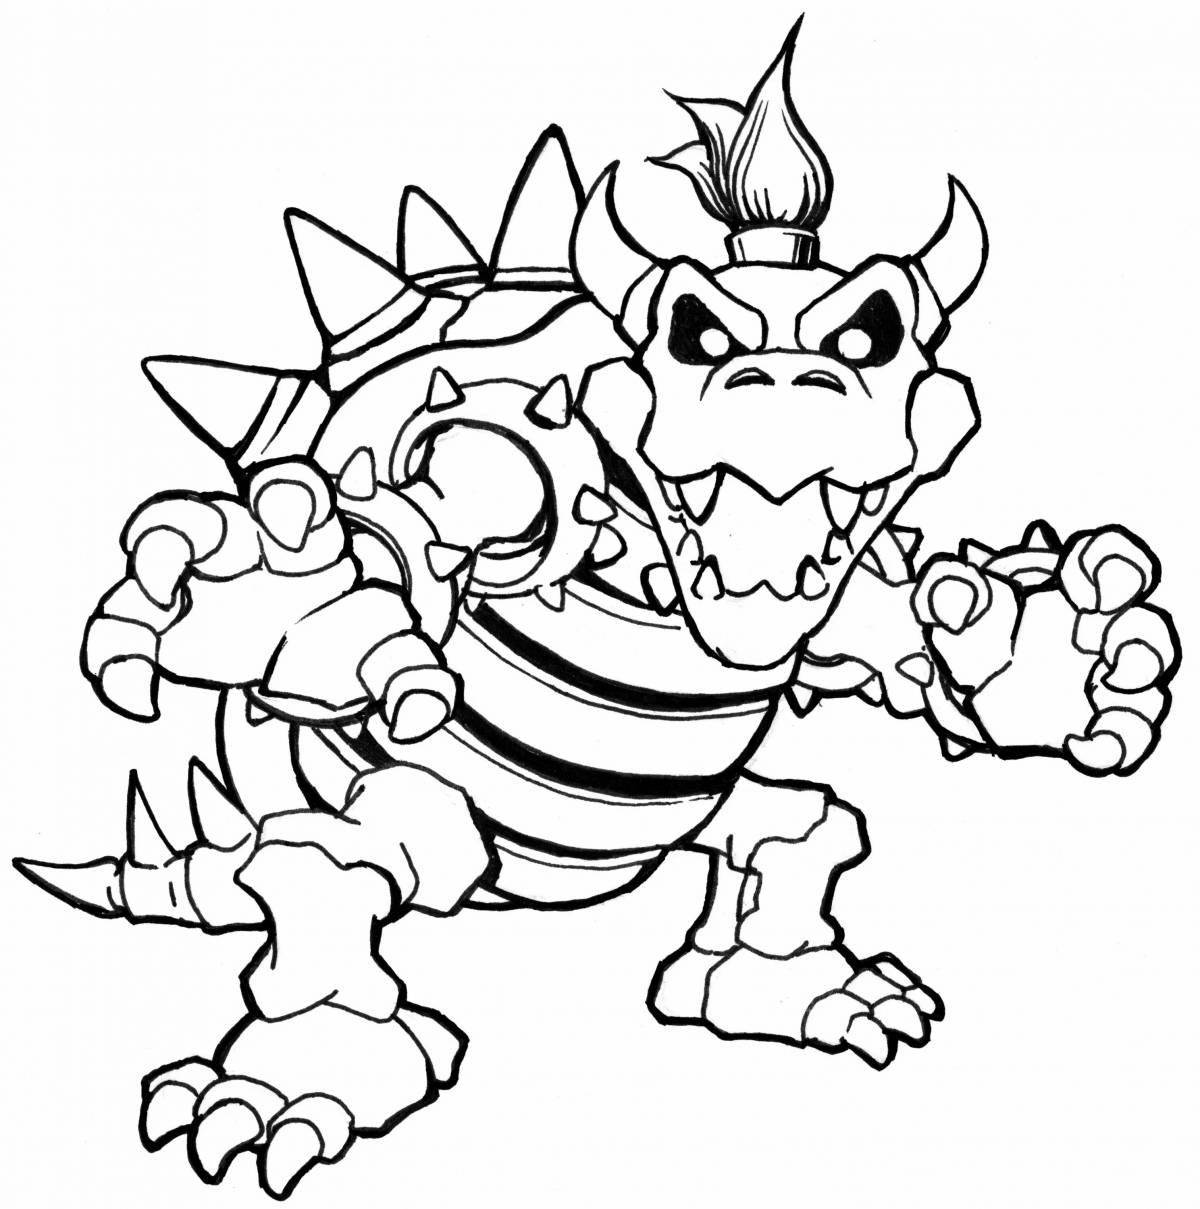 Awesome bowser coloring book